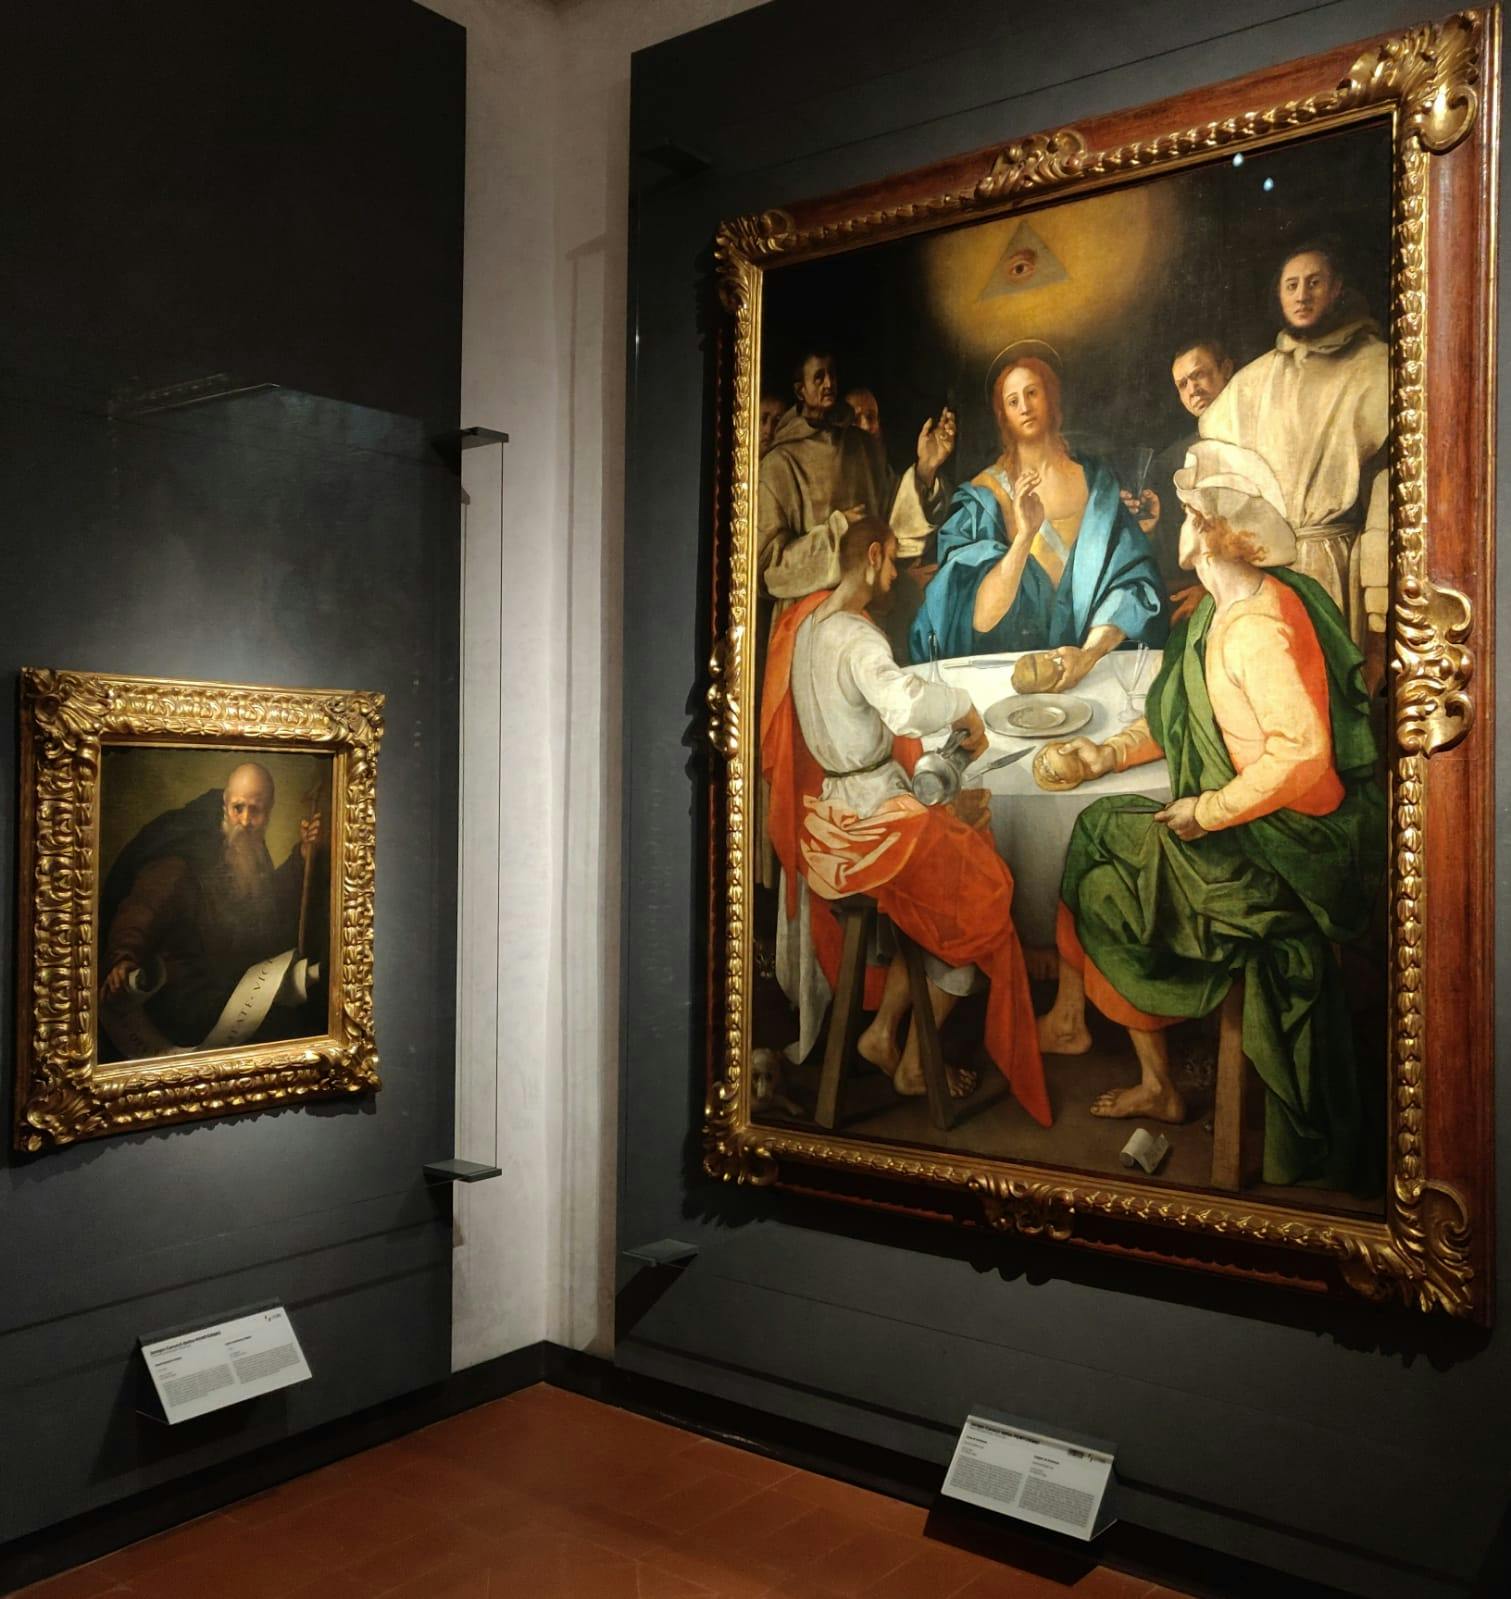 The Uffizi reopens with 16th-century masterpieces on display for the first time